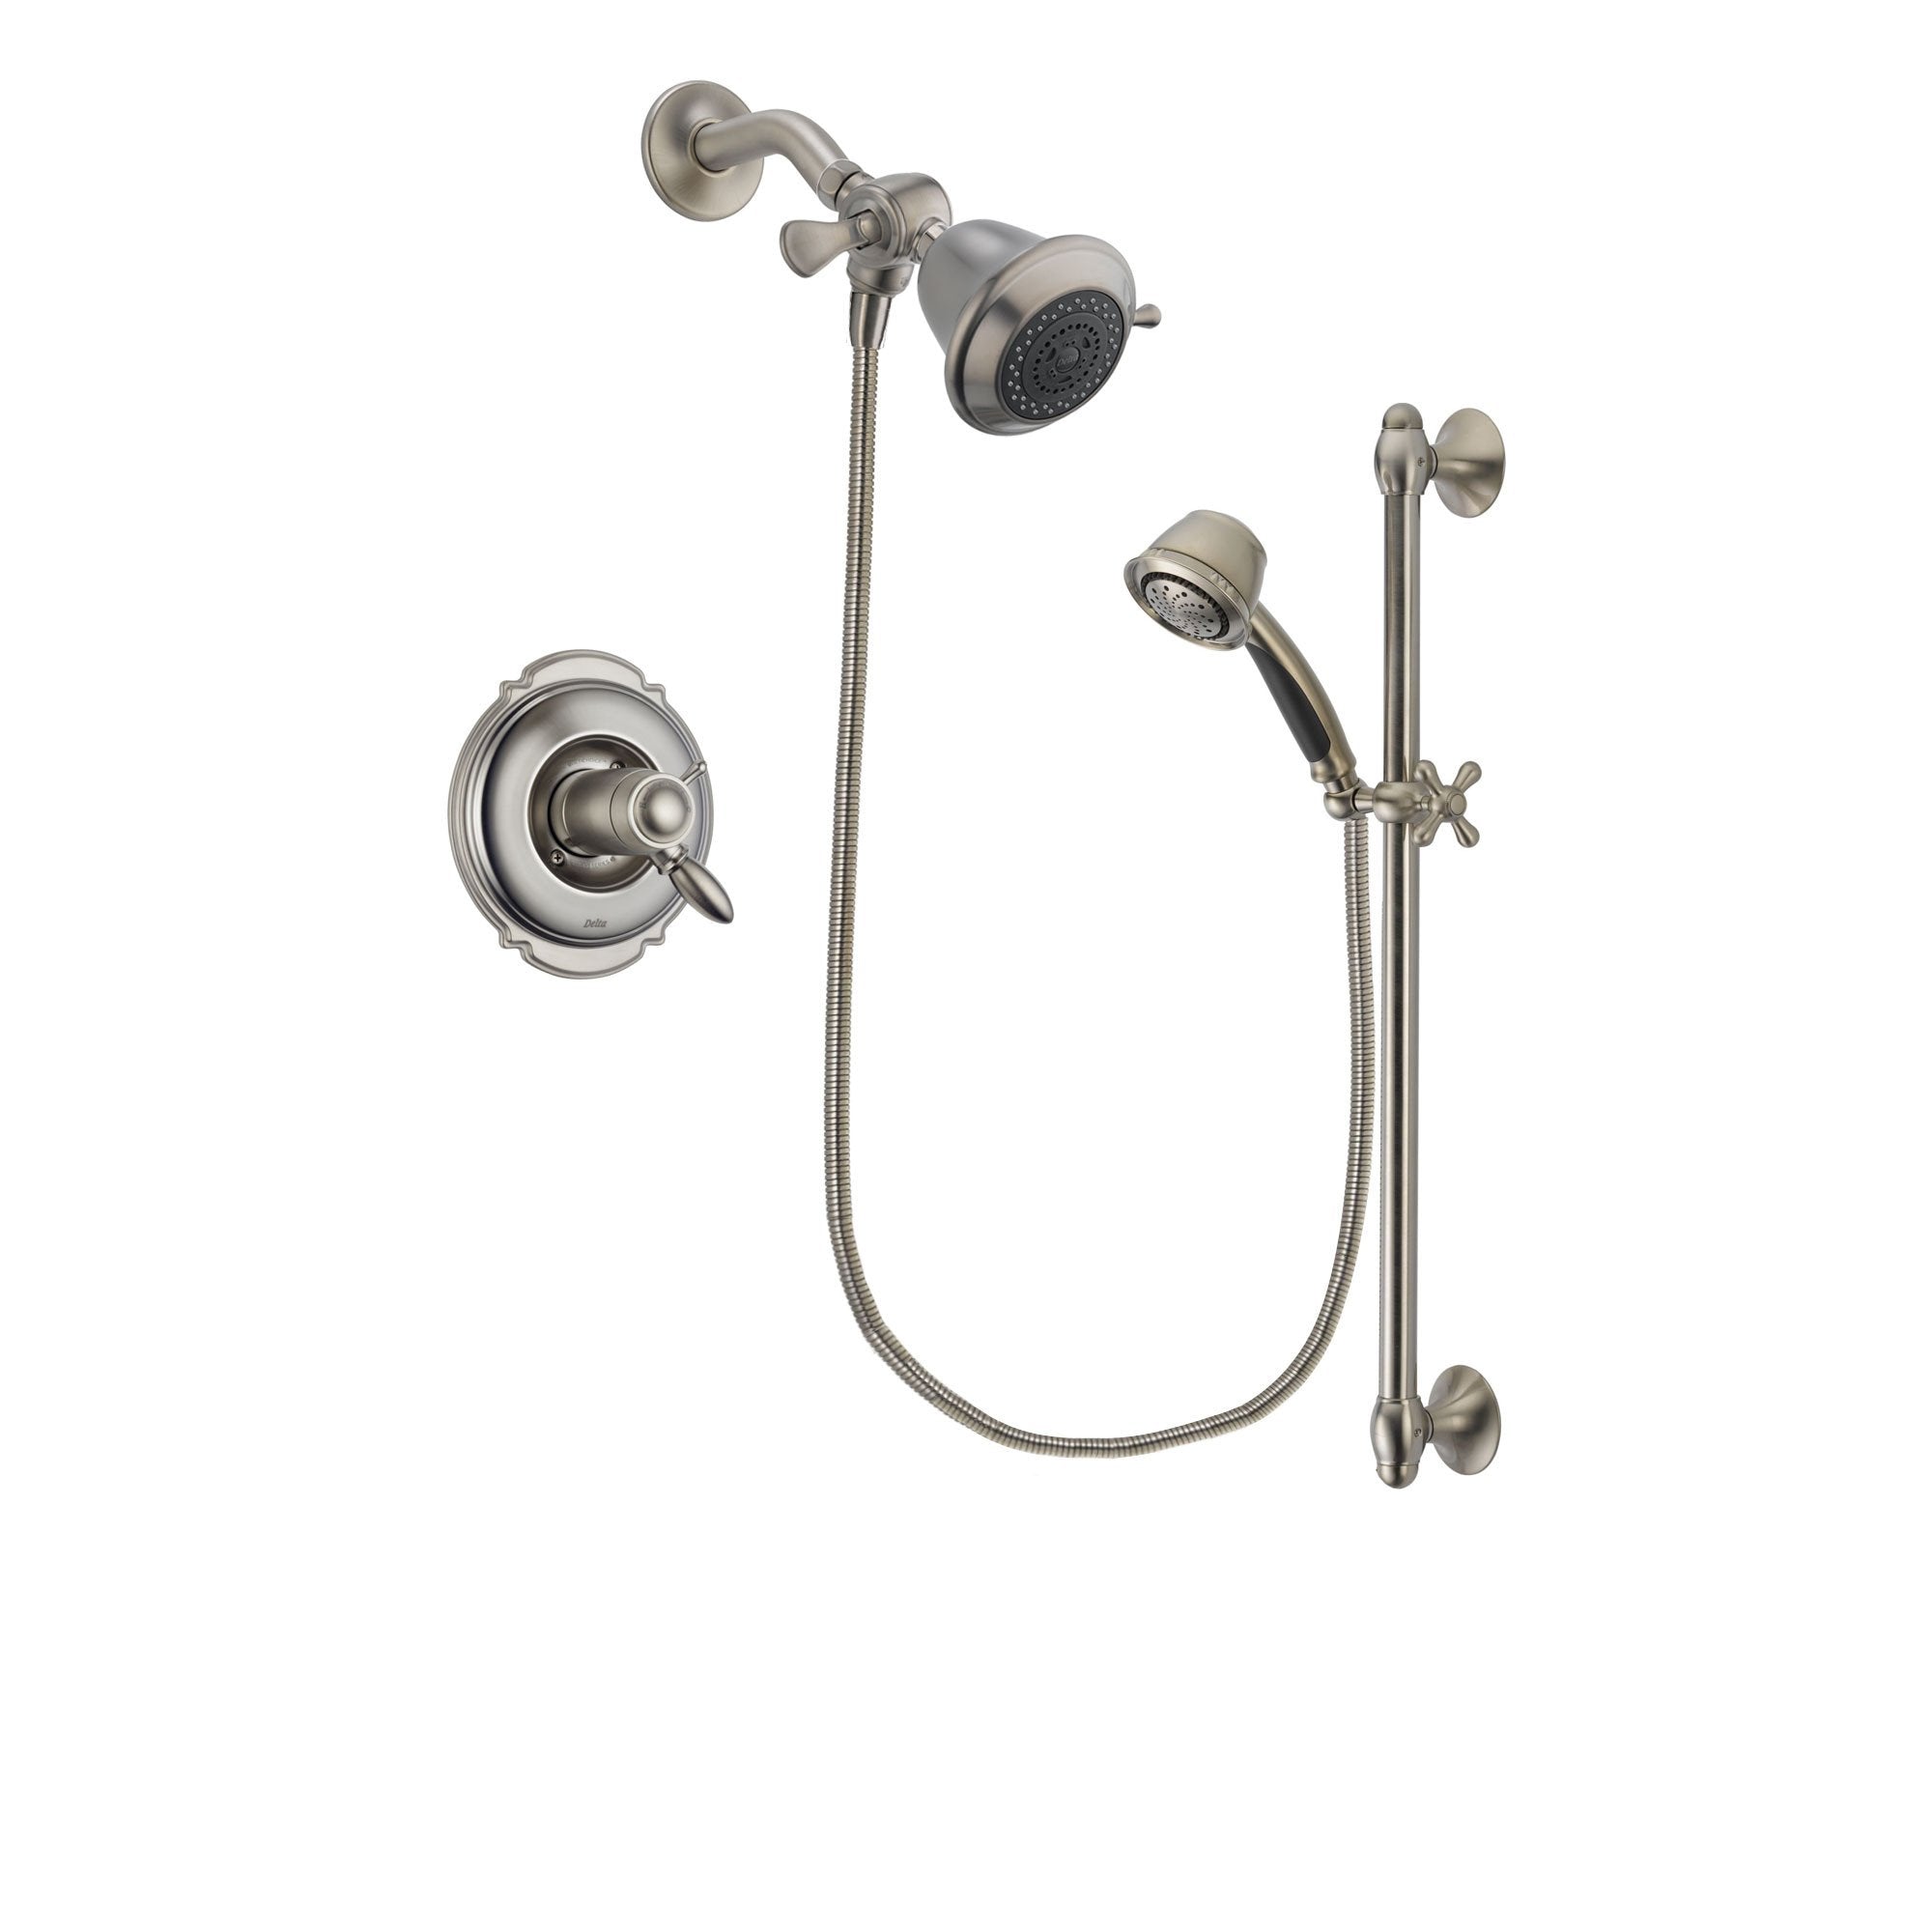 Delta Victorian Stainless Steel Finish Thermostatic Shower Faucet System Package with Shower Head and 5-Spray Personal Handshower with Slide Bar Includes Rough-in Valve DSP1244V